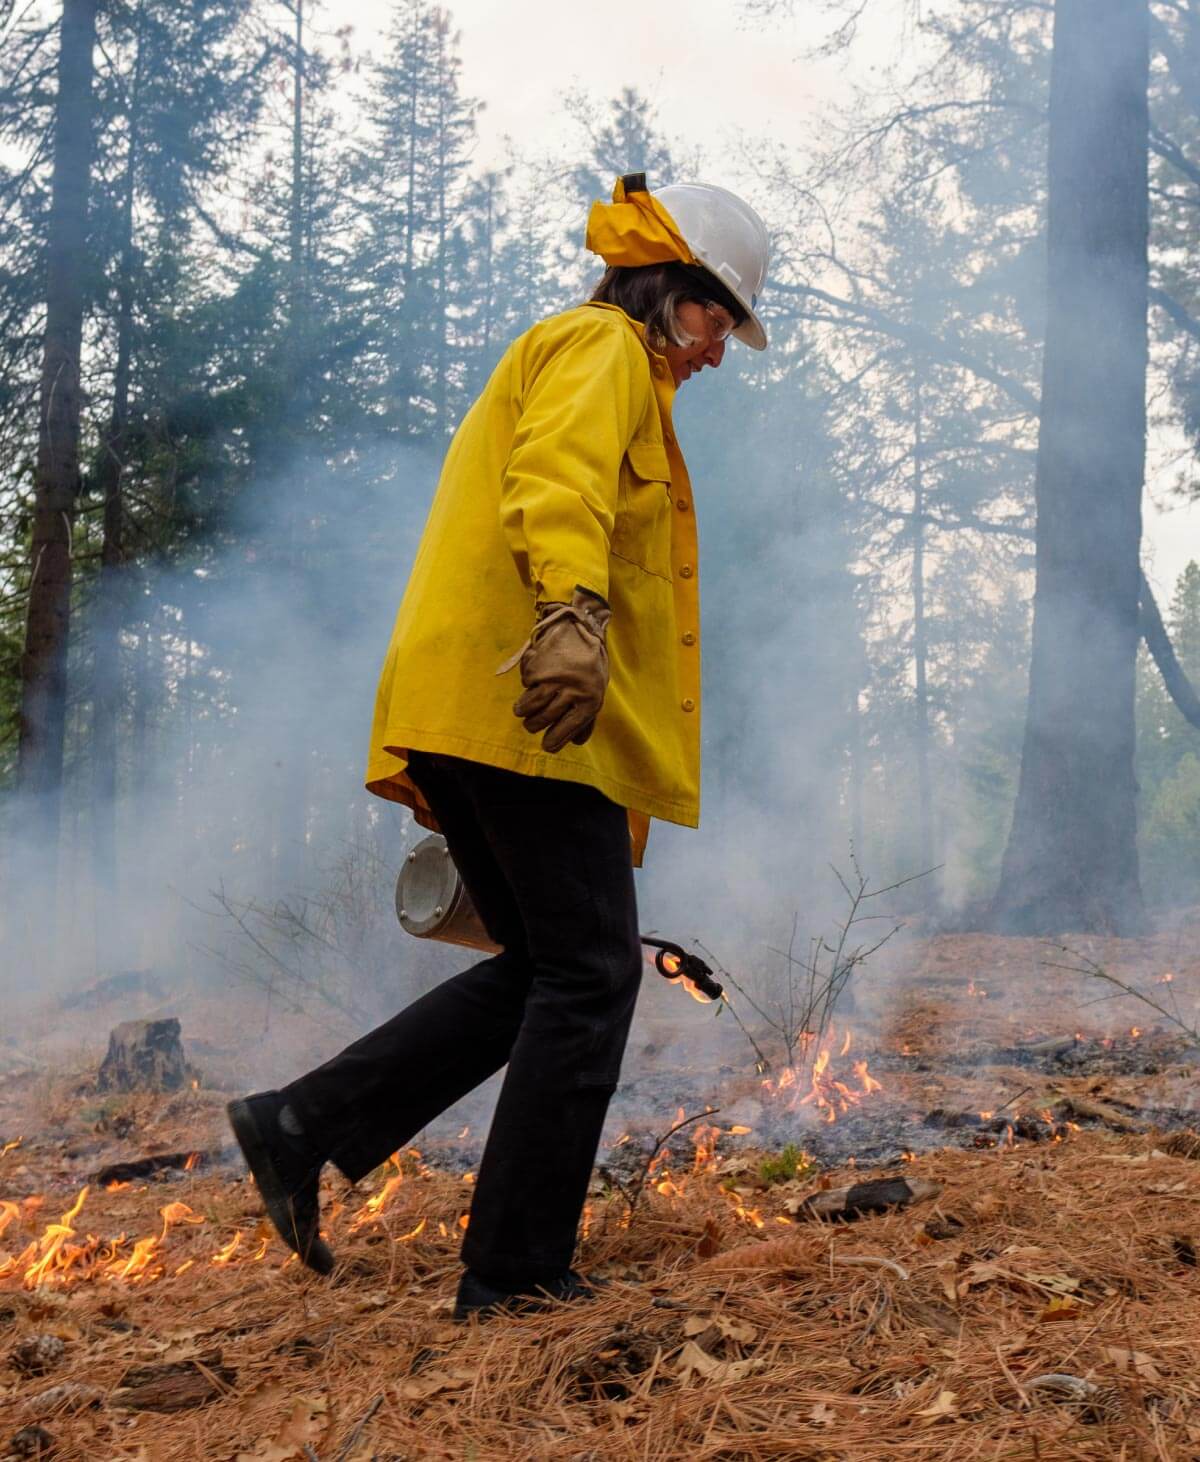 woman in fire proof gear walking through the forest doing a controlled burn